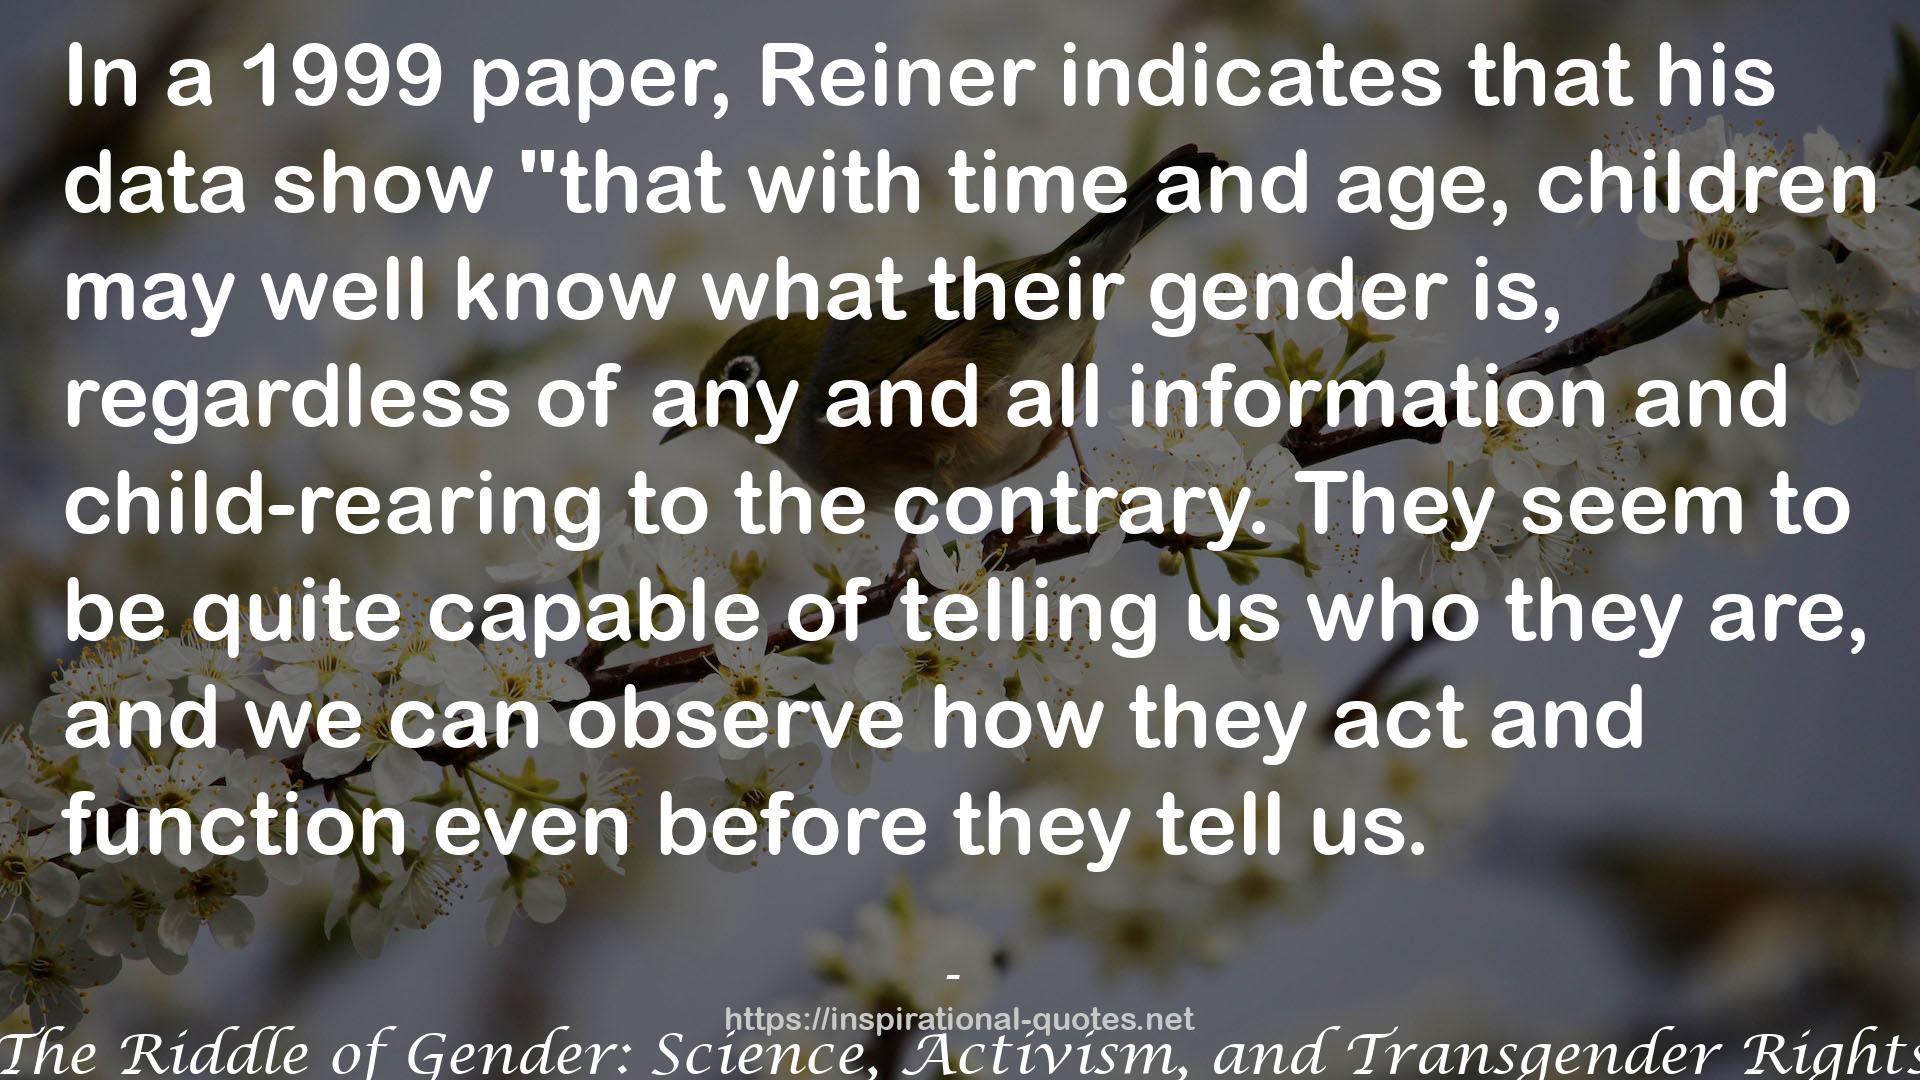 The Riddle of Gender: Science, Activism, and Transgender Rights QUOTES